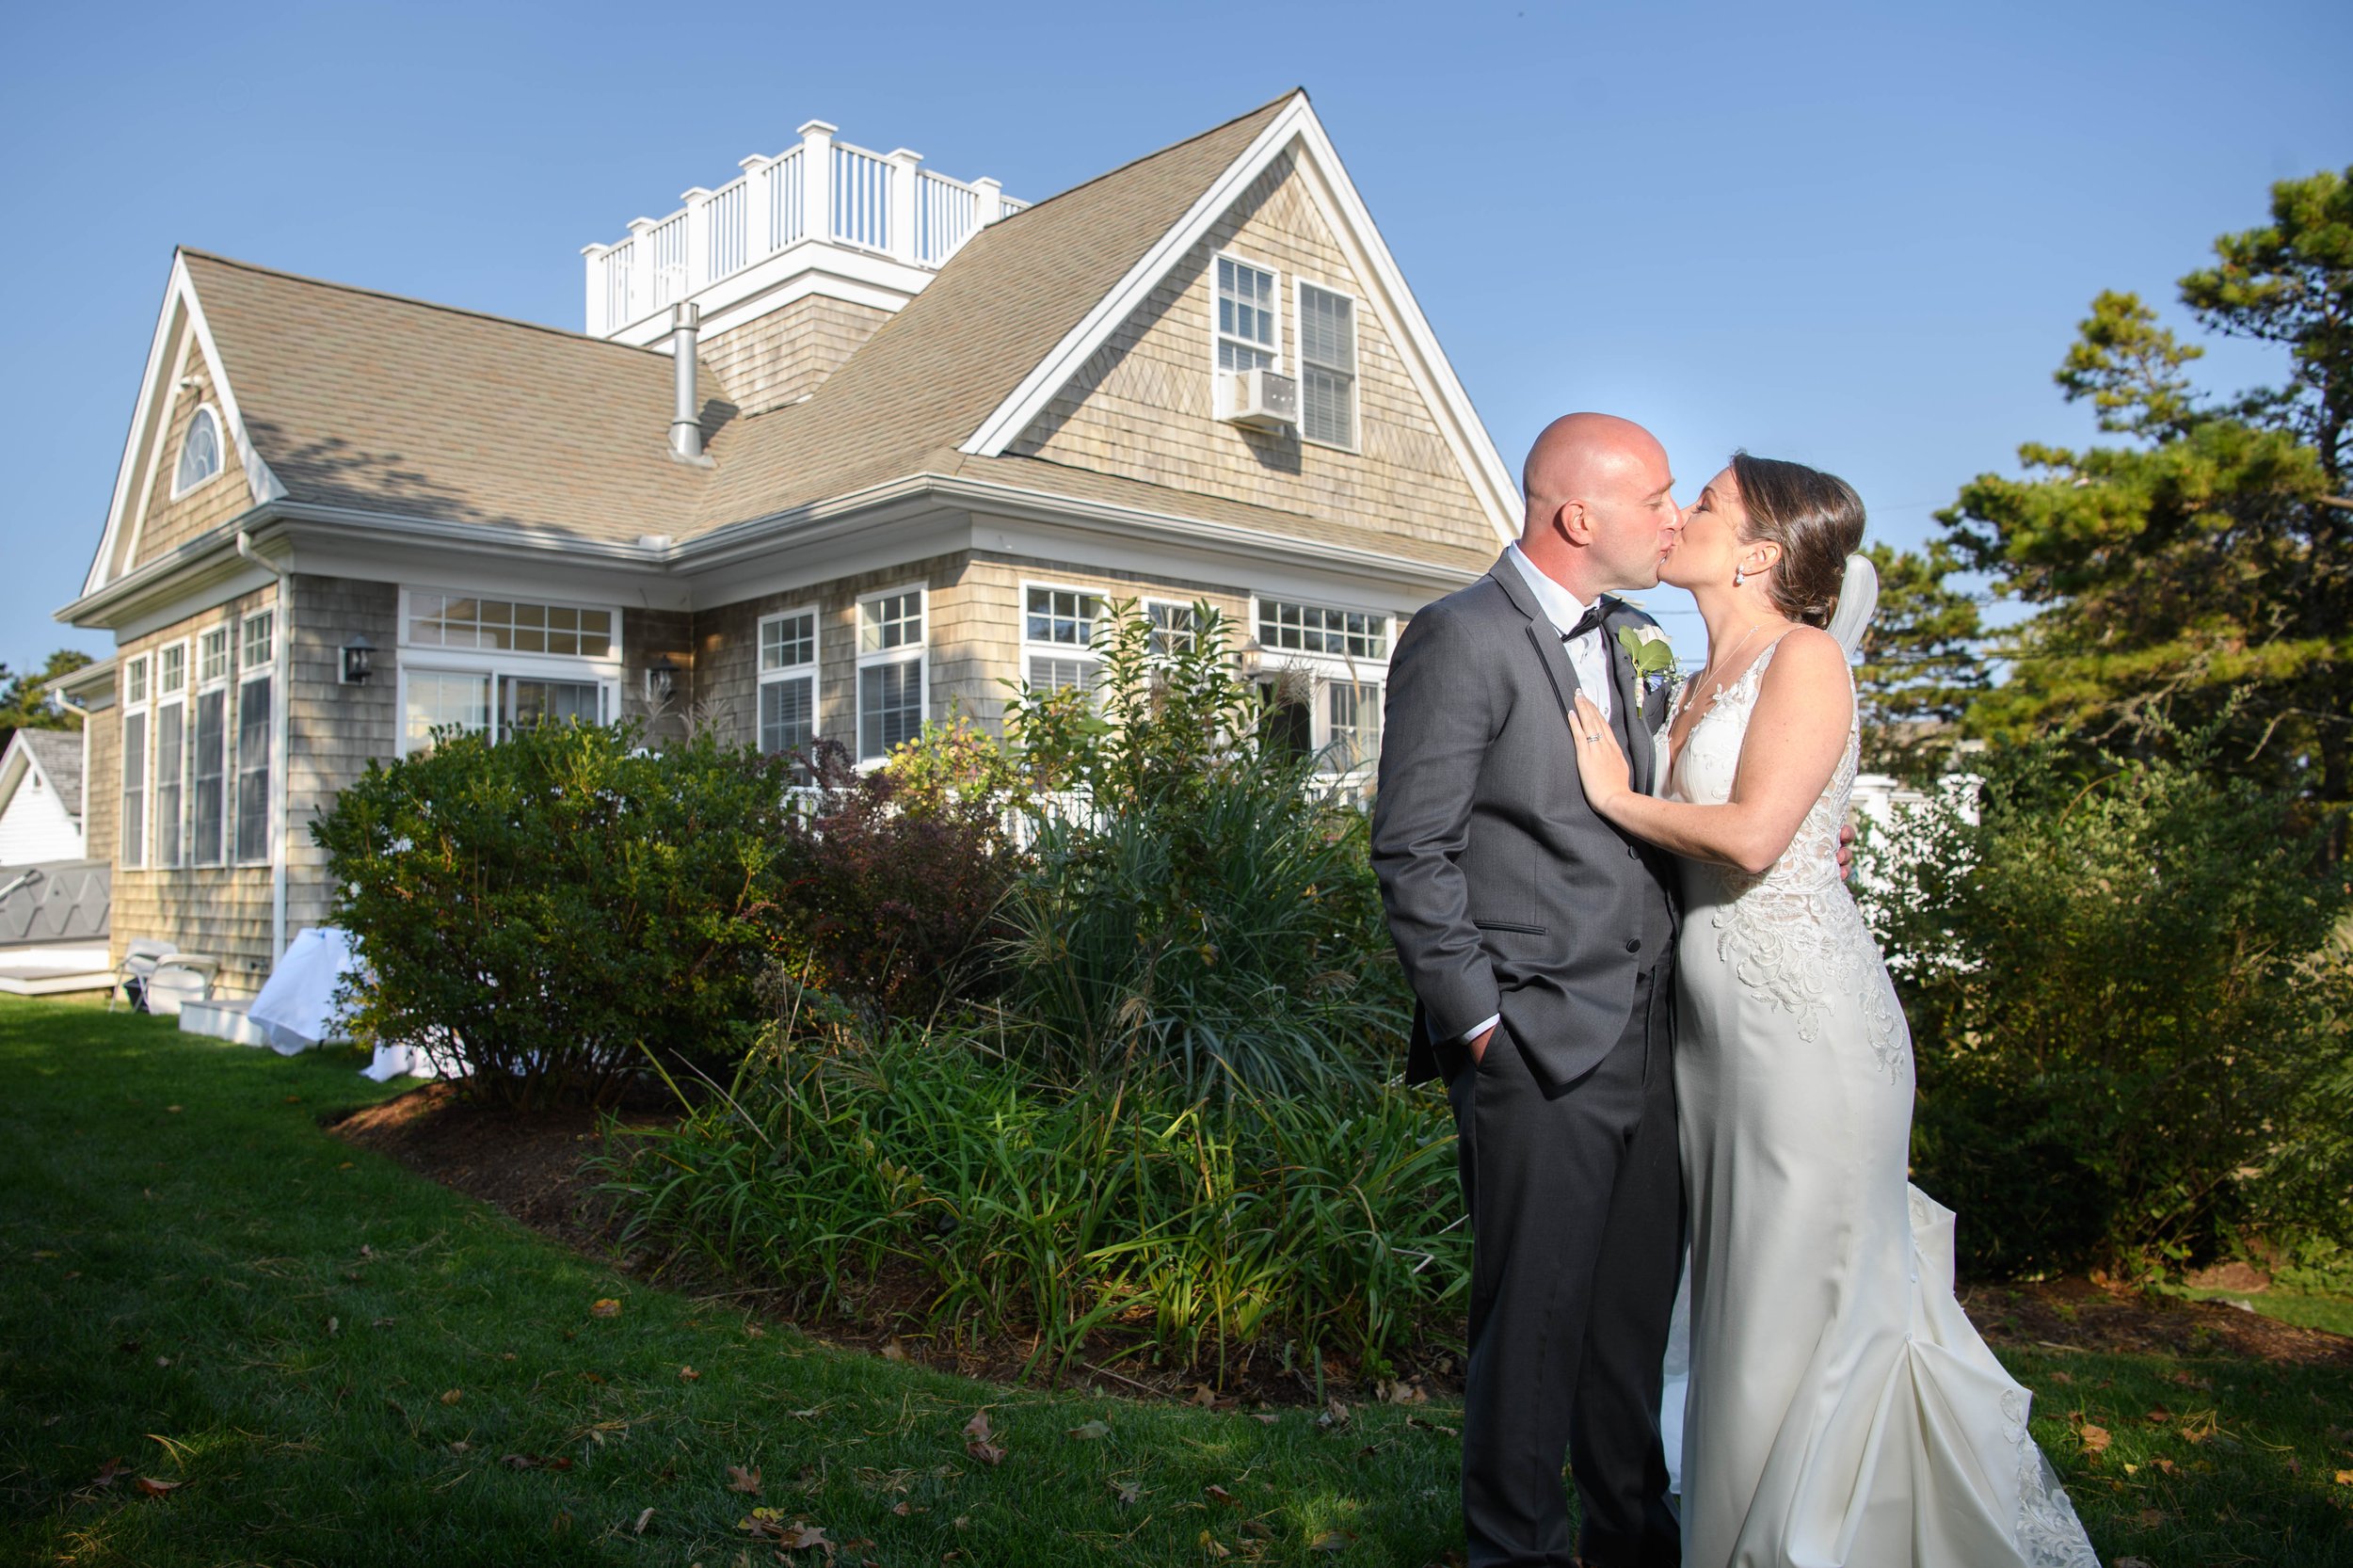 Beautiful Cape Cod wedding set against the backdrop of a quintessential beach cottage as the couple shares a kiss